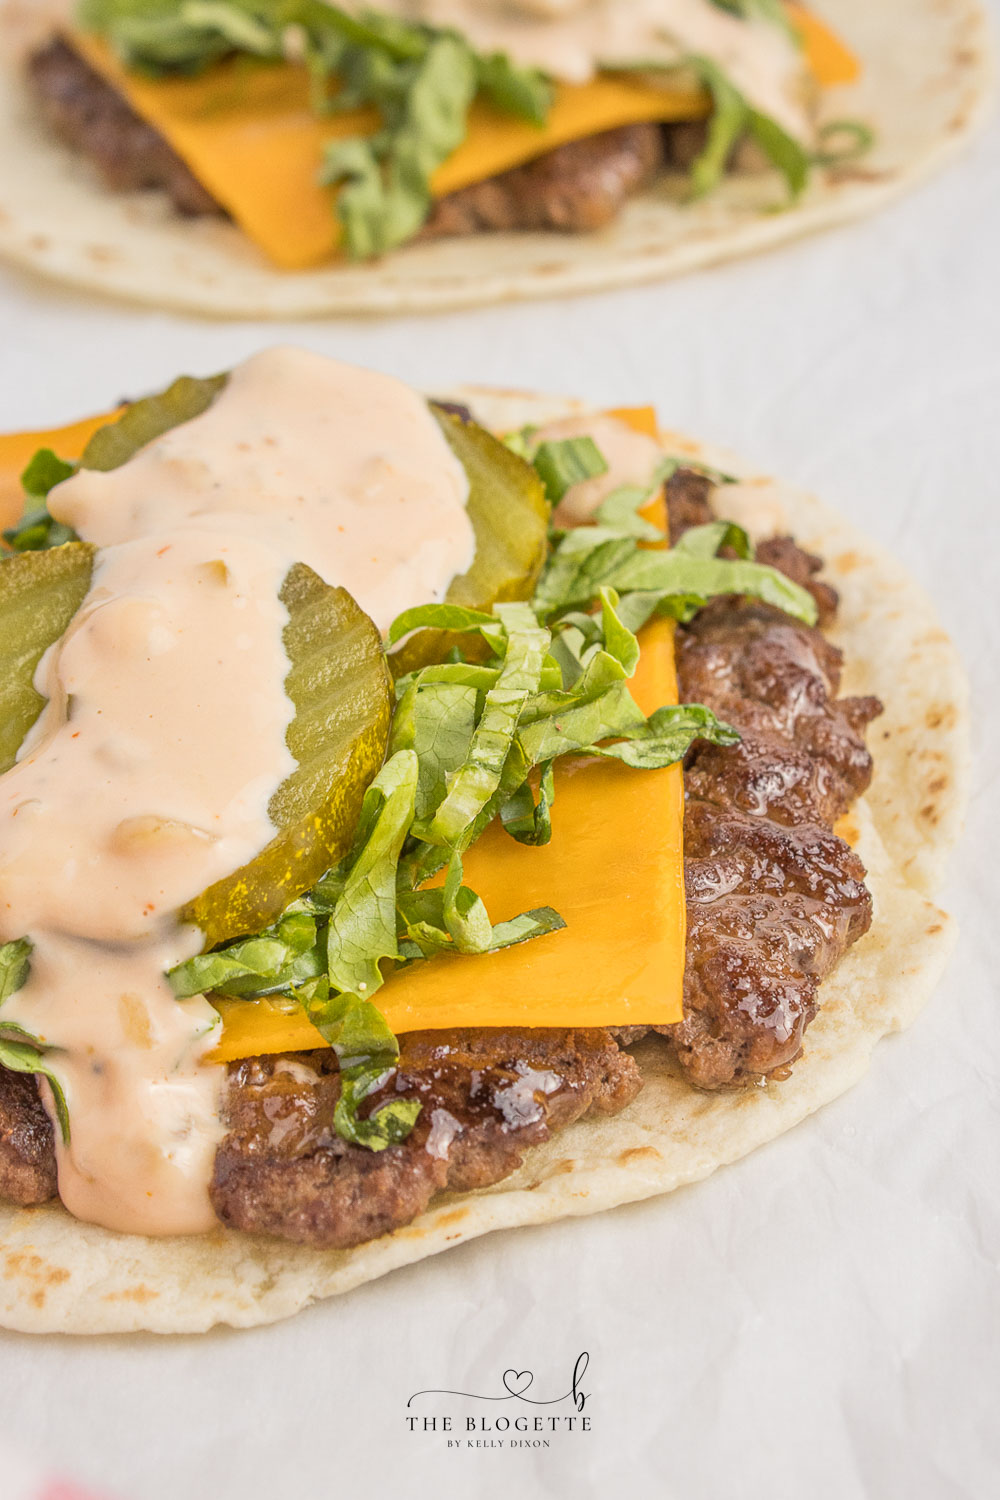 Big Mac Tacos! Juicy beef patty, melted cheddar, topped with an easy-to-make homemade Big Mac sauce! Add Taco Burgers to your menu tonight!